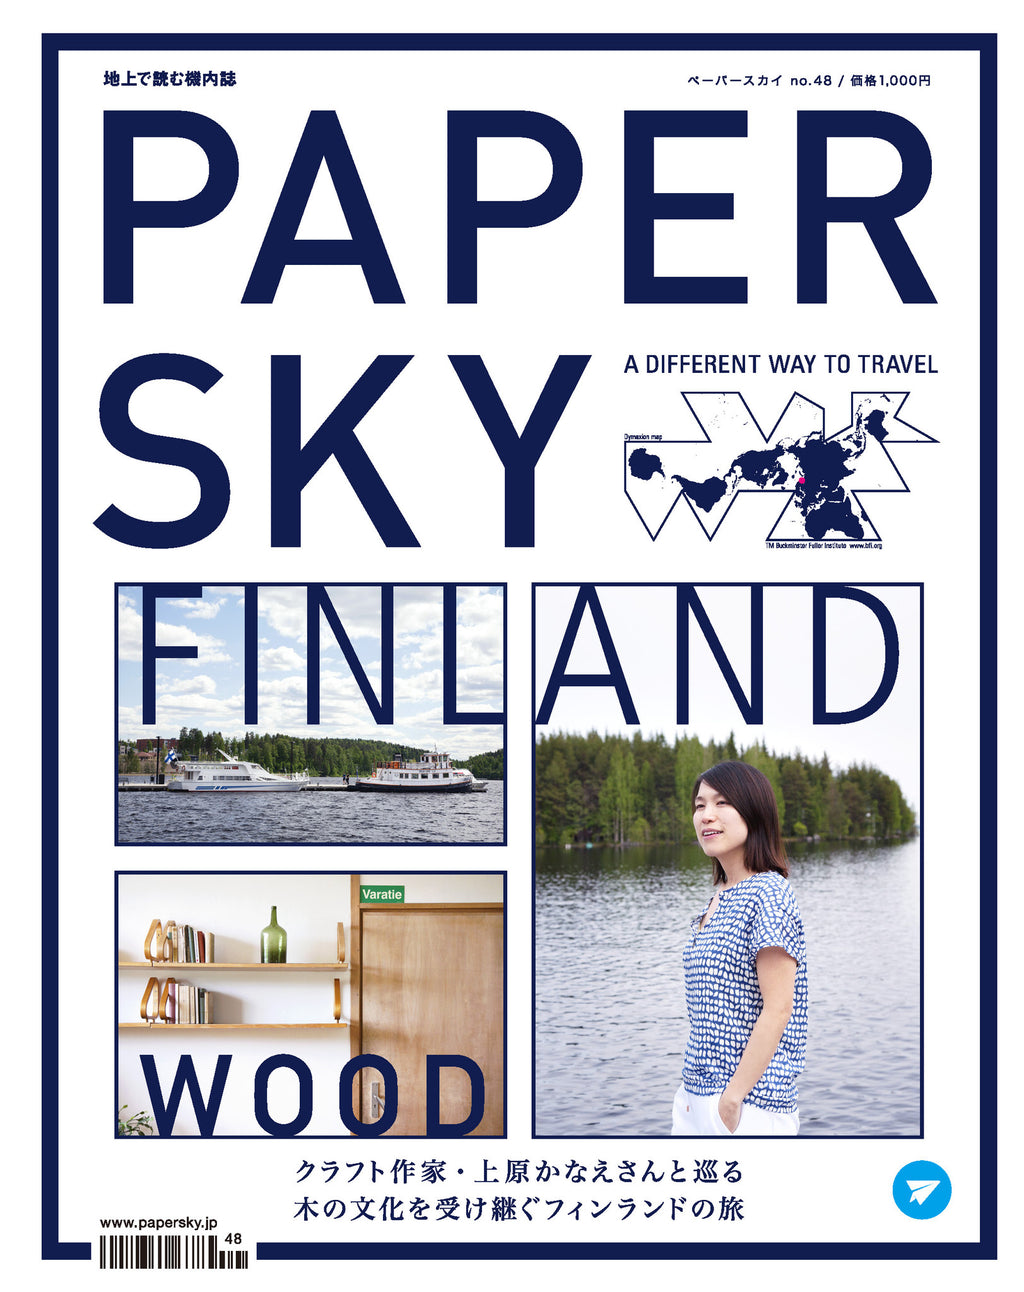 finland, wood, papersky magazine, 森の国フィンランド